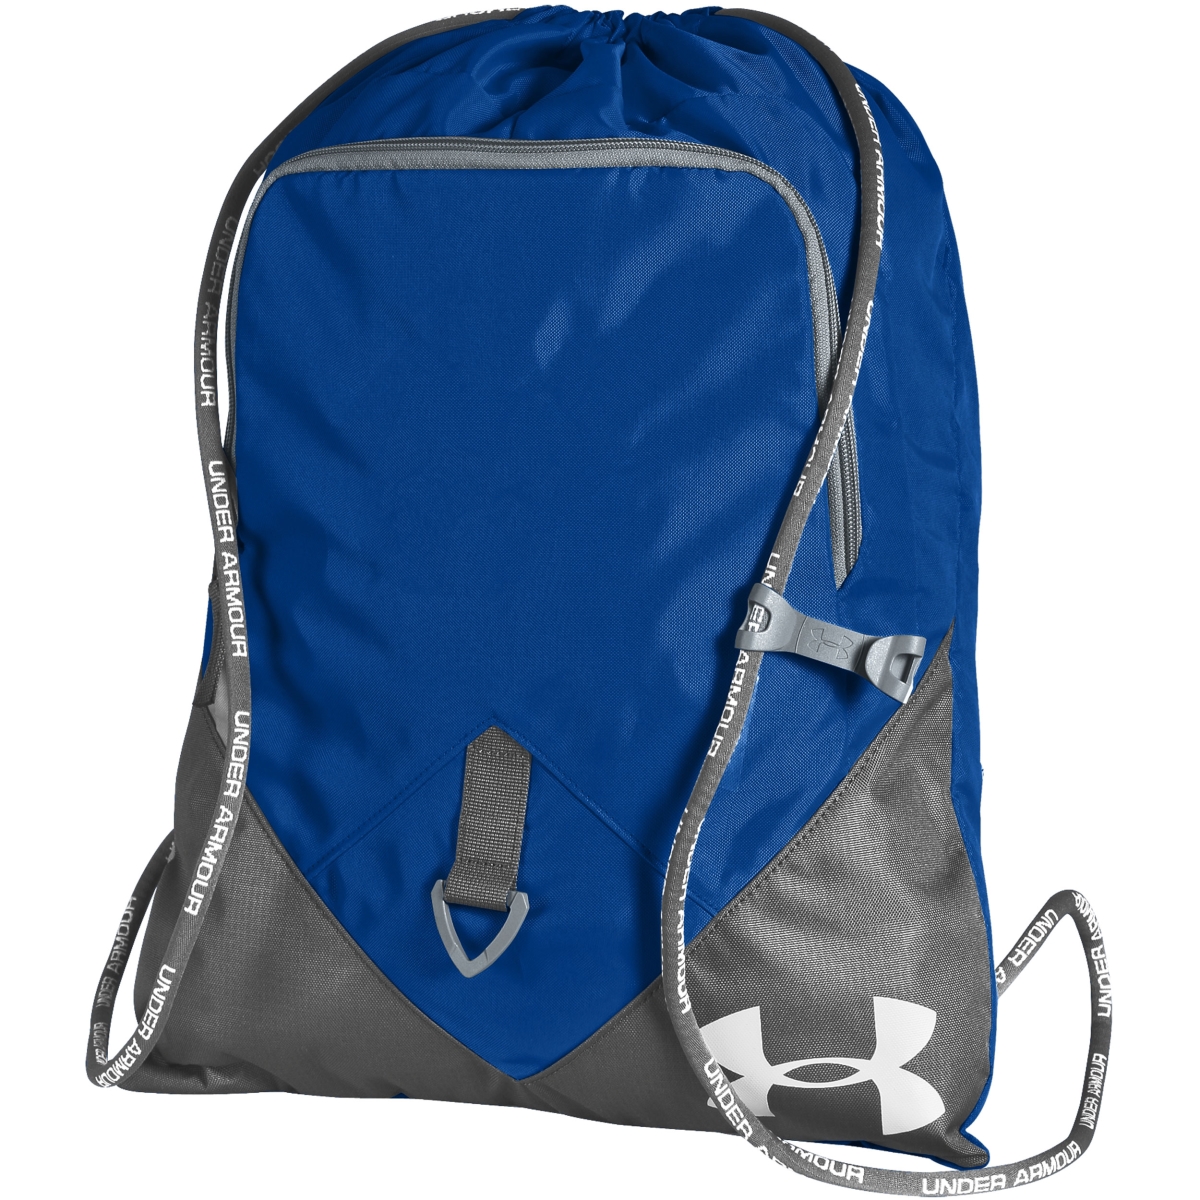 Under Armour 66350 Undeniable Sackpack, Royal